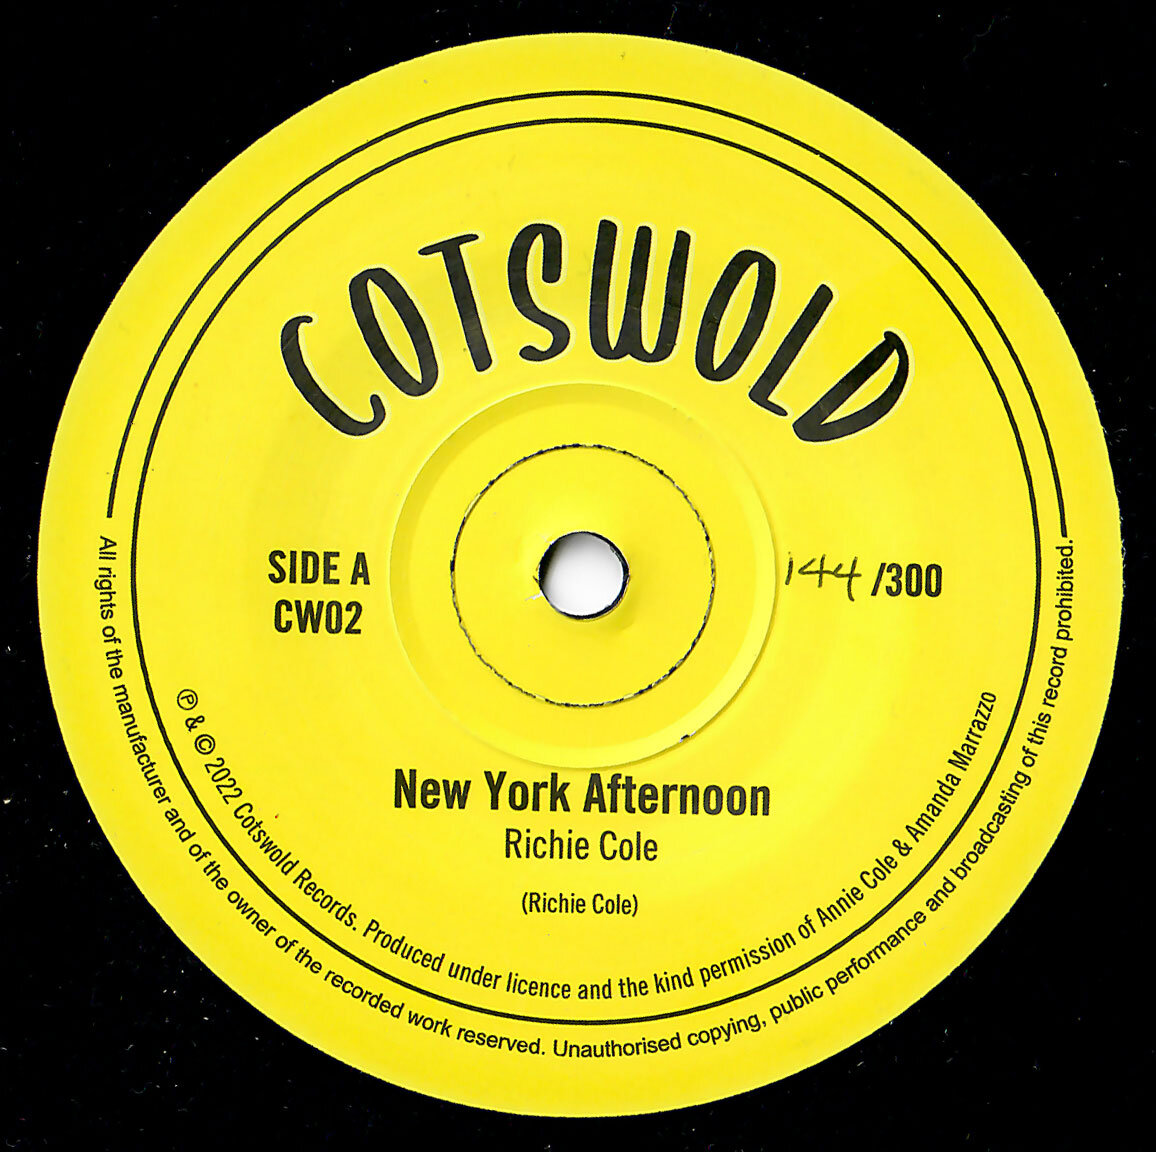 Richie Cole - New York Afternoon - Cotswold Records zoom image